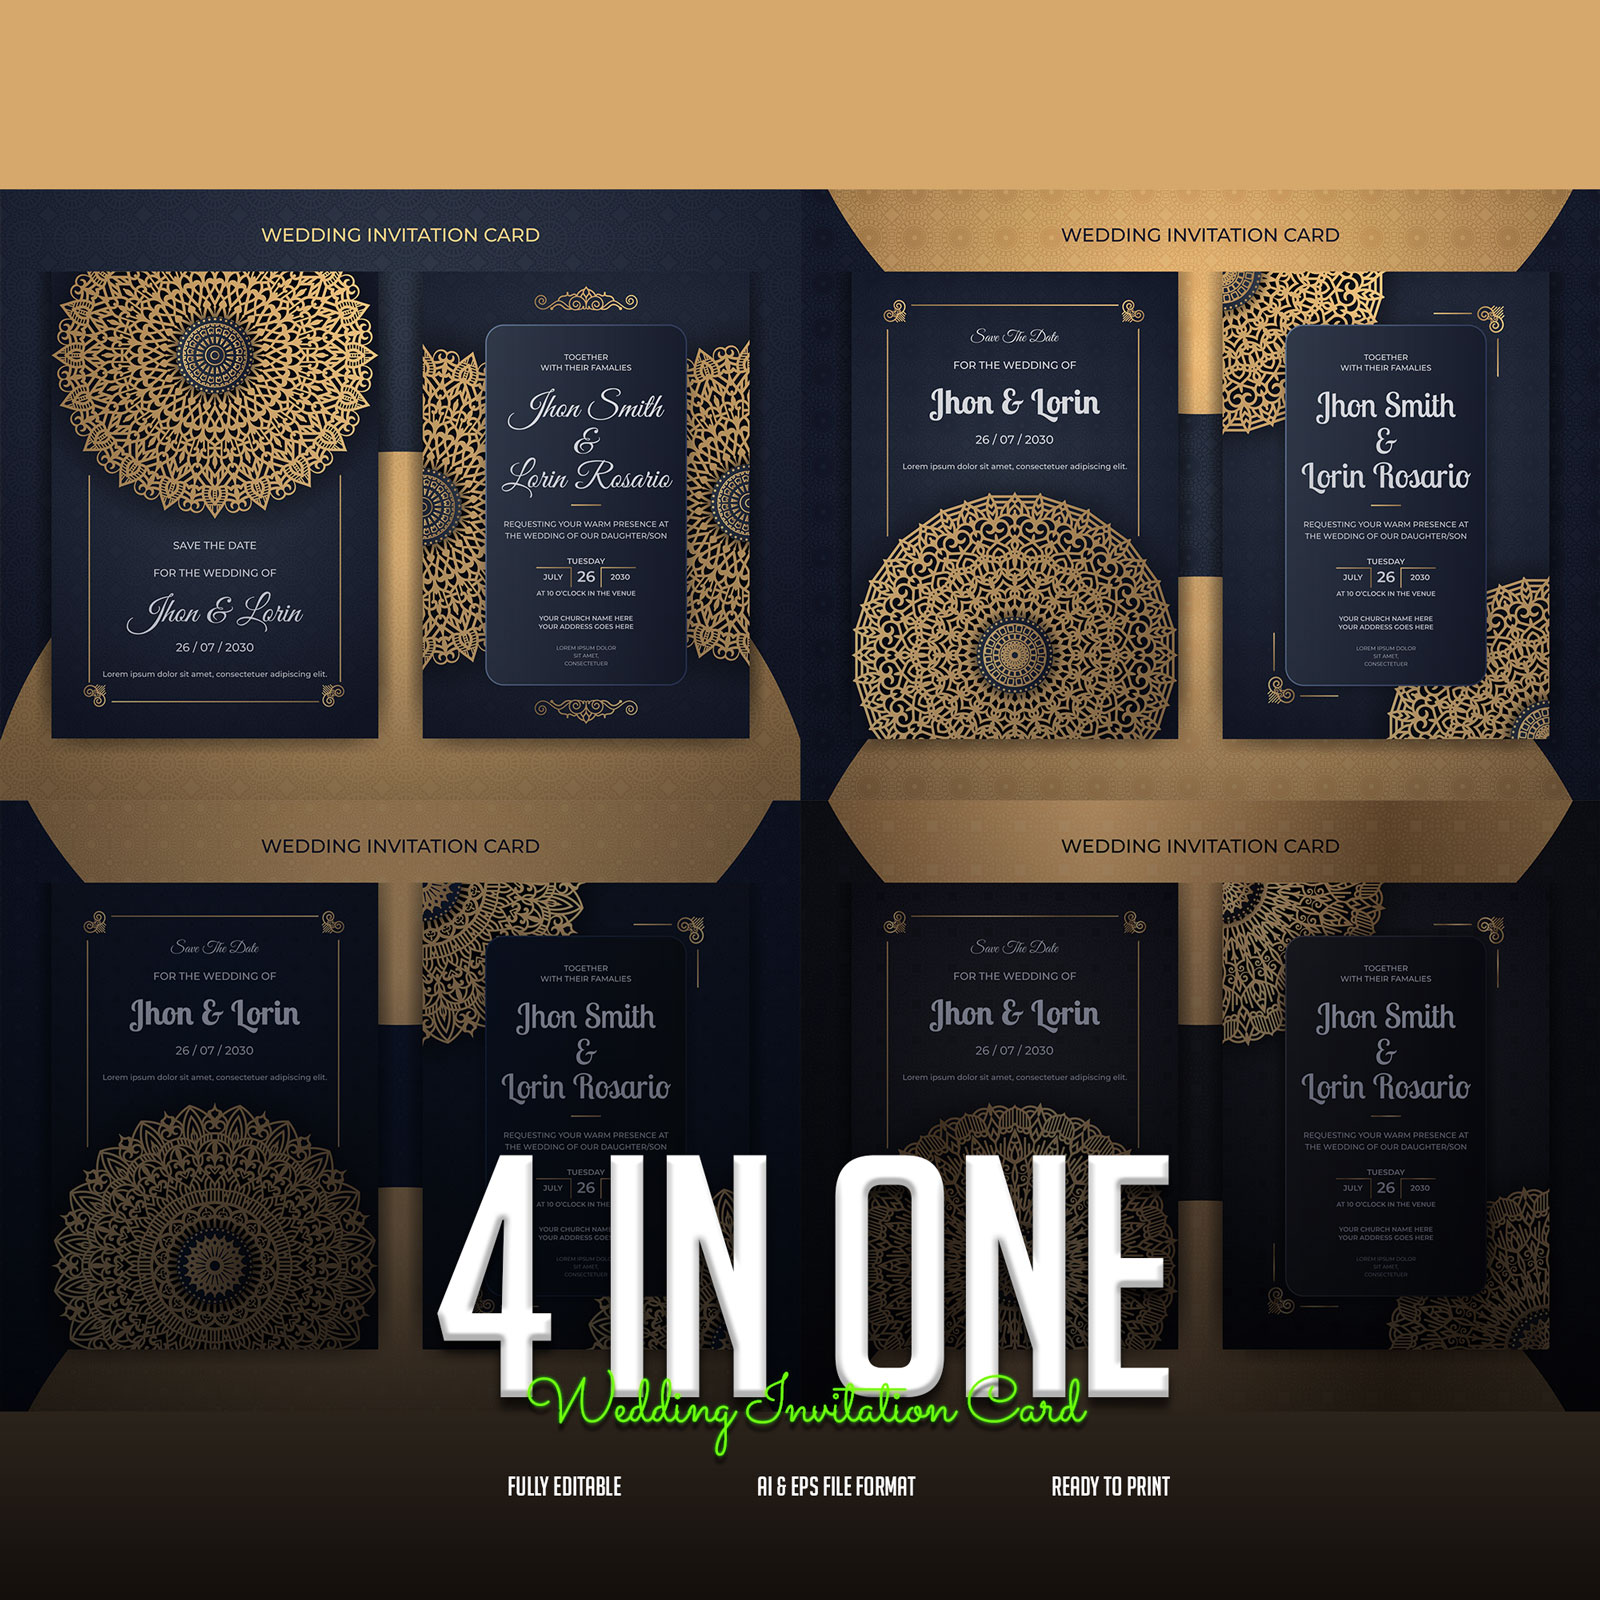 4 In One Royal Luxury Wedding Invitation Card Only In $7 cover image.